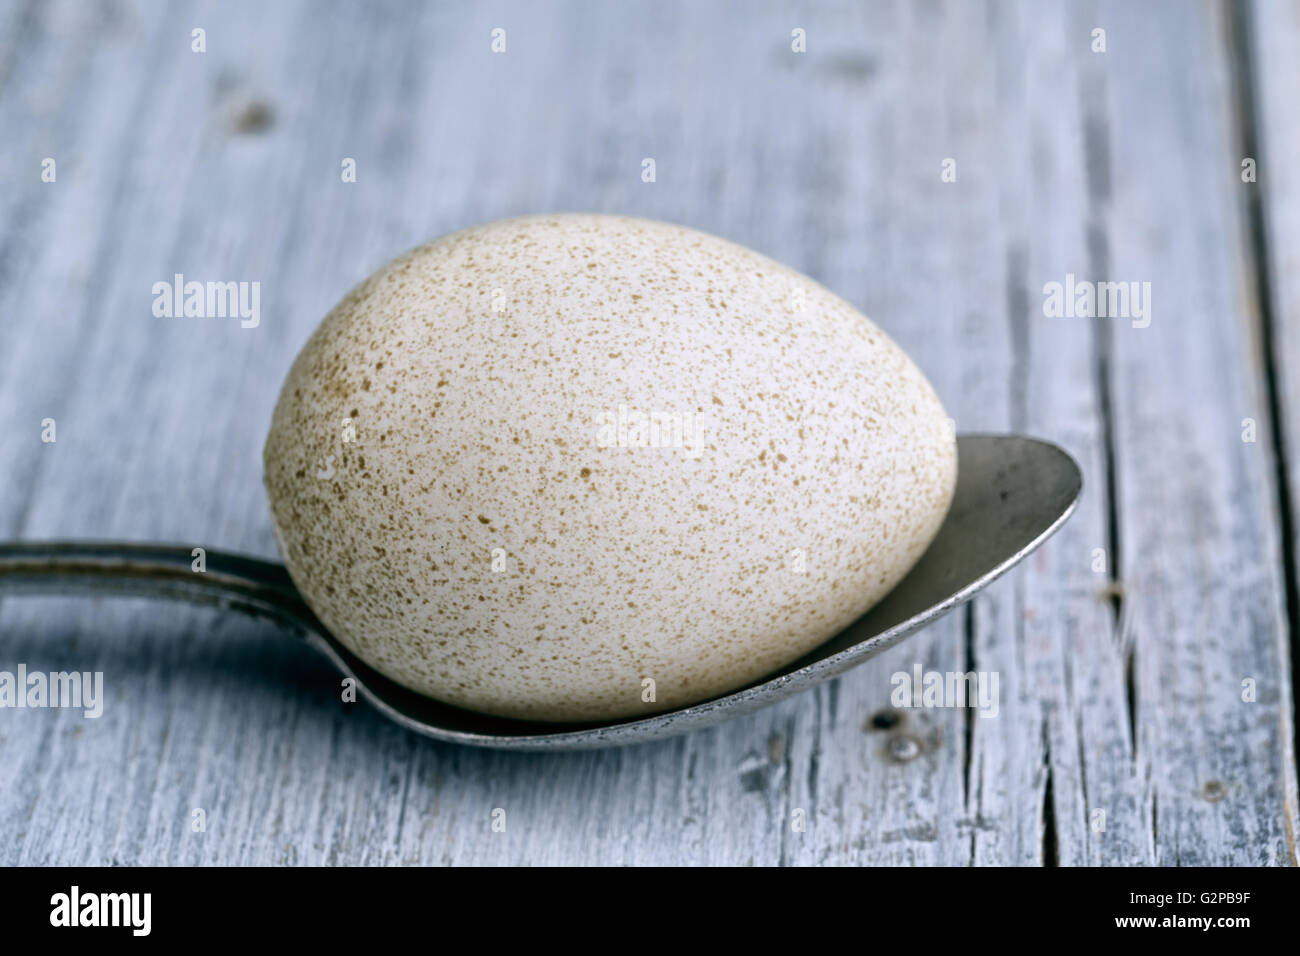 White Spotted Duck Egg and metal Spoon on wooden board Stock Photo